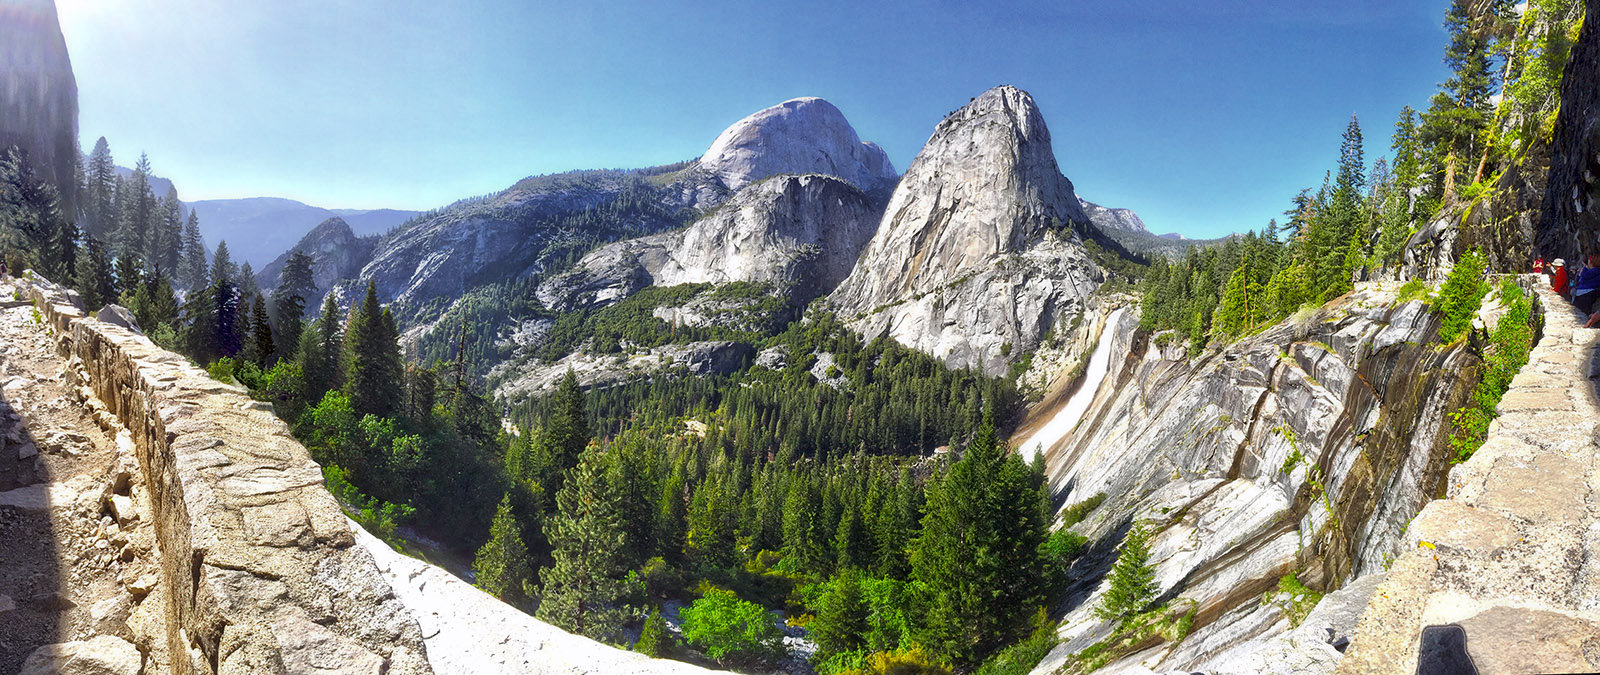 Looking Back Towards Half Dome On The Way Down John Muir Trail